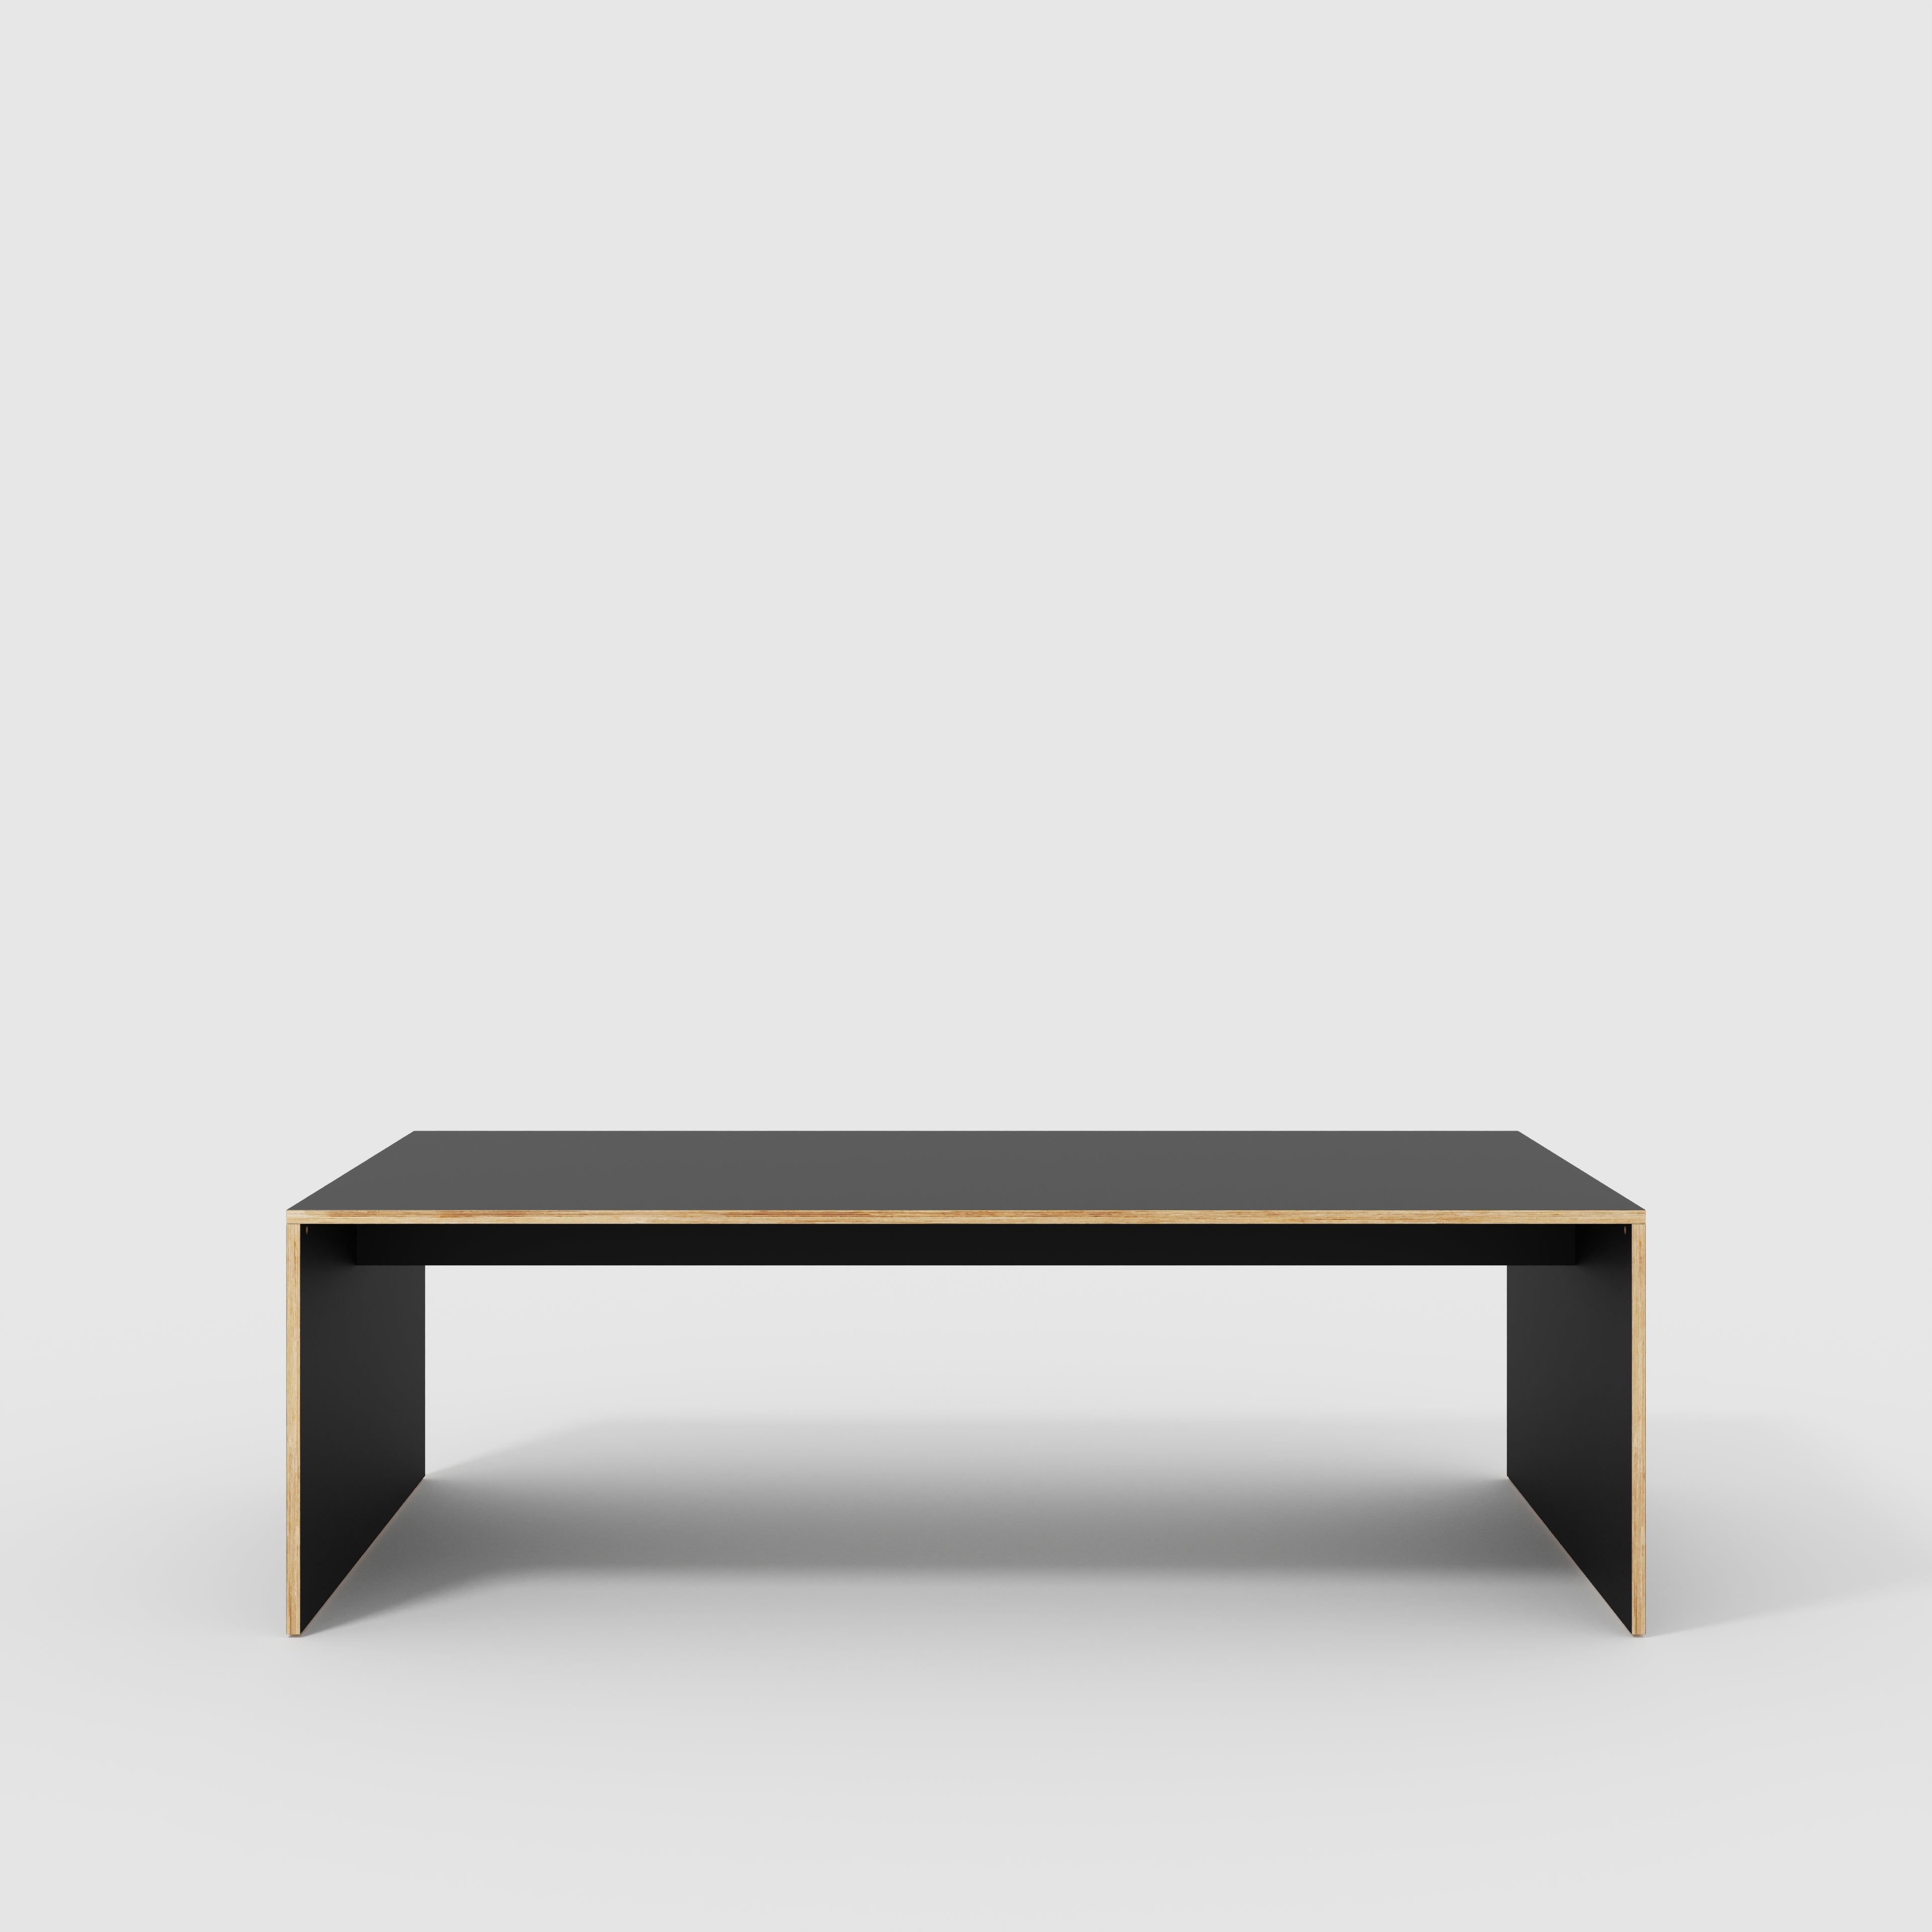 Table with Solid Sides - Formica Diamond Black - 2400(w) x 1200(d) x 750(h)